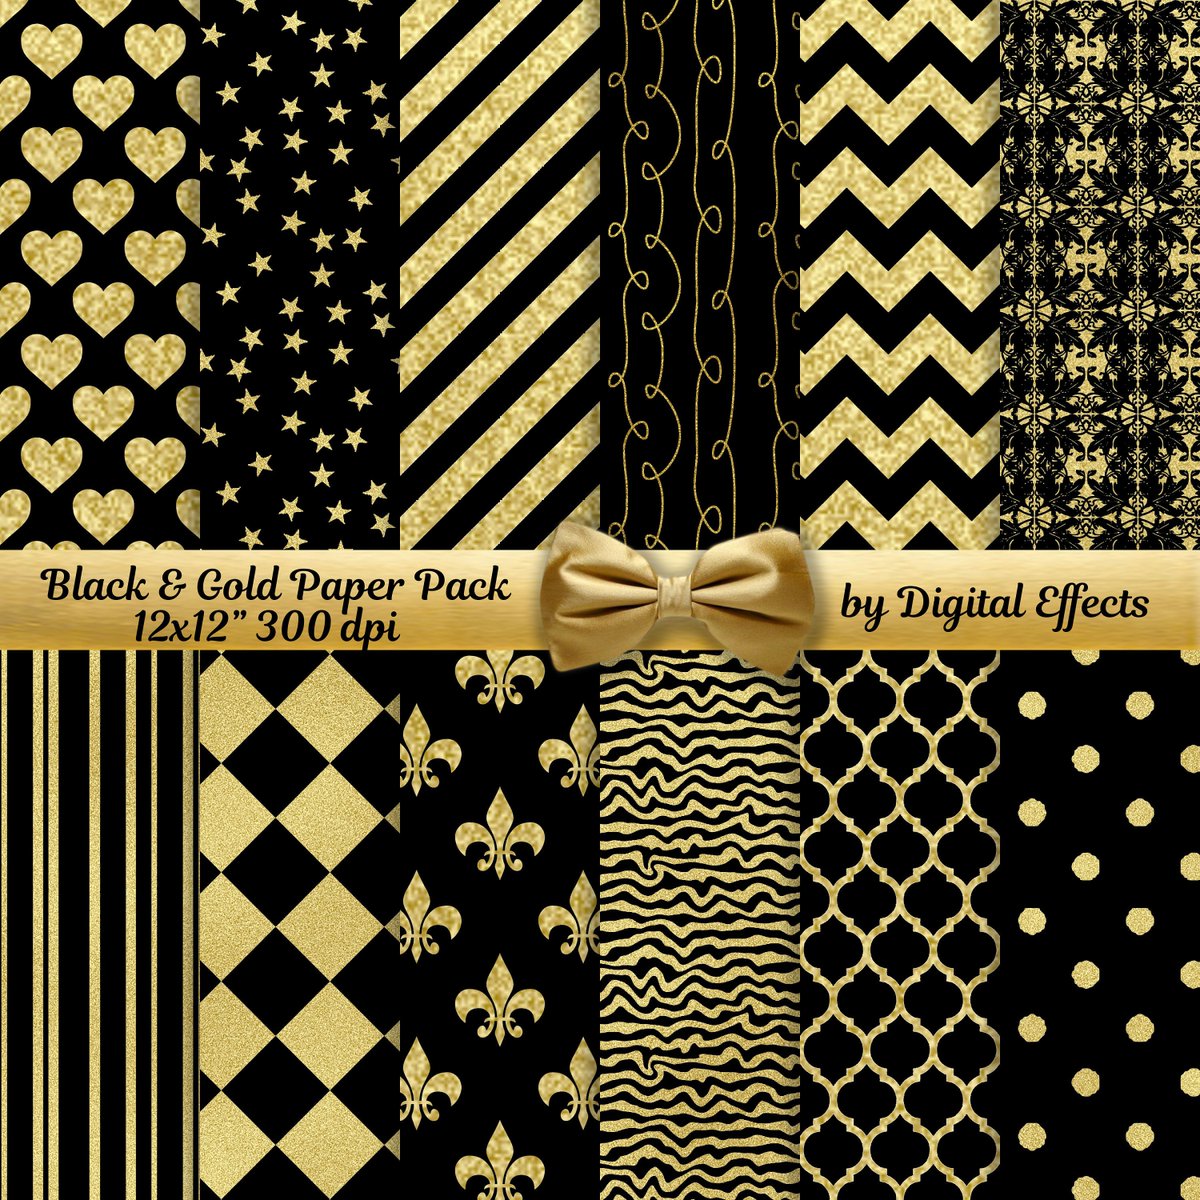 Excited to share the latest addition to my #etsy shop: Black & GOLD Digital Paper Pack, Gold Digital Paper, 12x12' Scrapbook Paper, Gold Glitter Digital Paper,Gold Wedding Paper,Commercial Use etsy.me/2LKXyNT #digitalpaperpack #goldglitterpaper